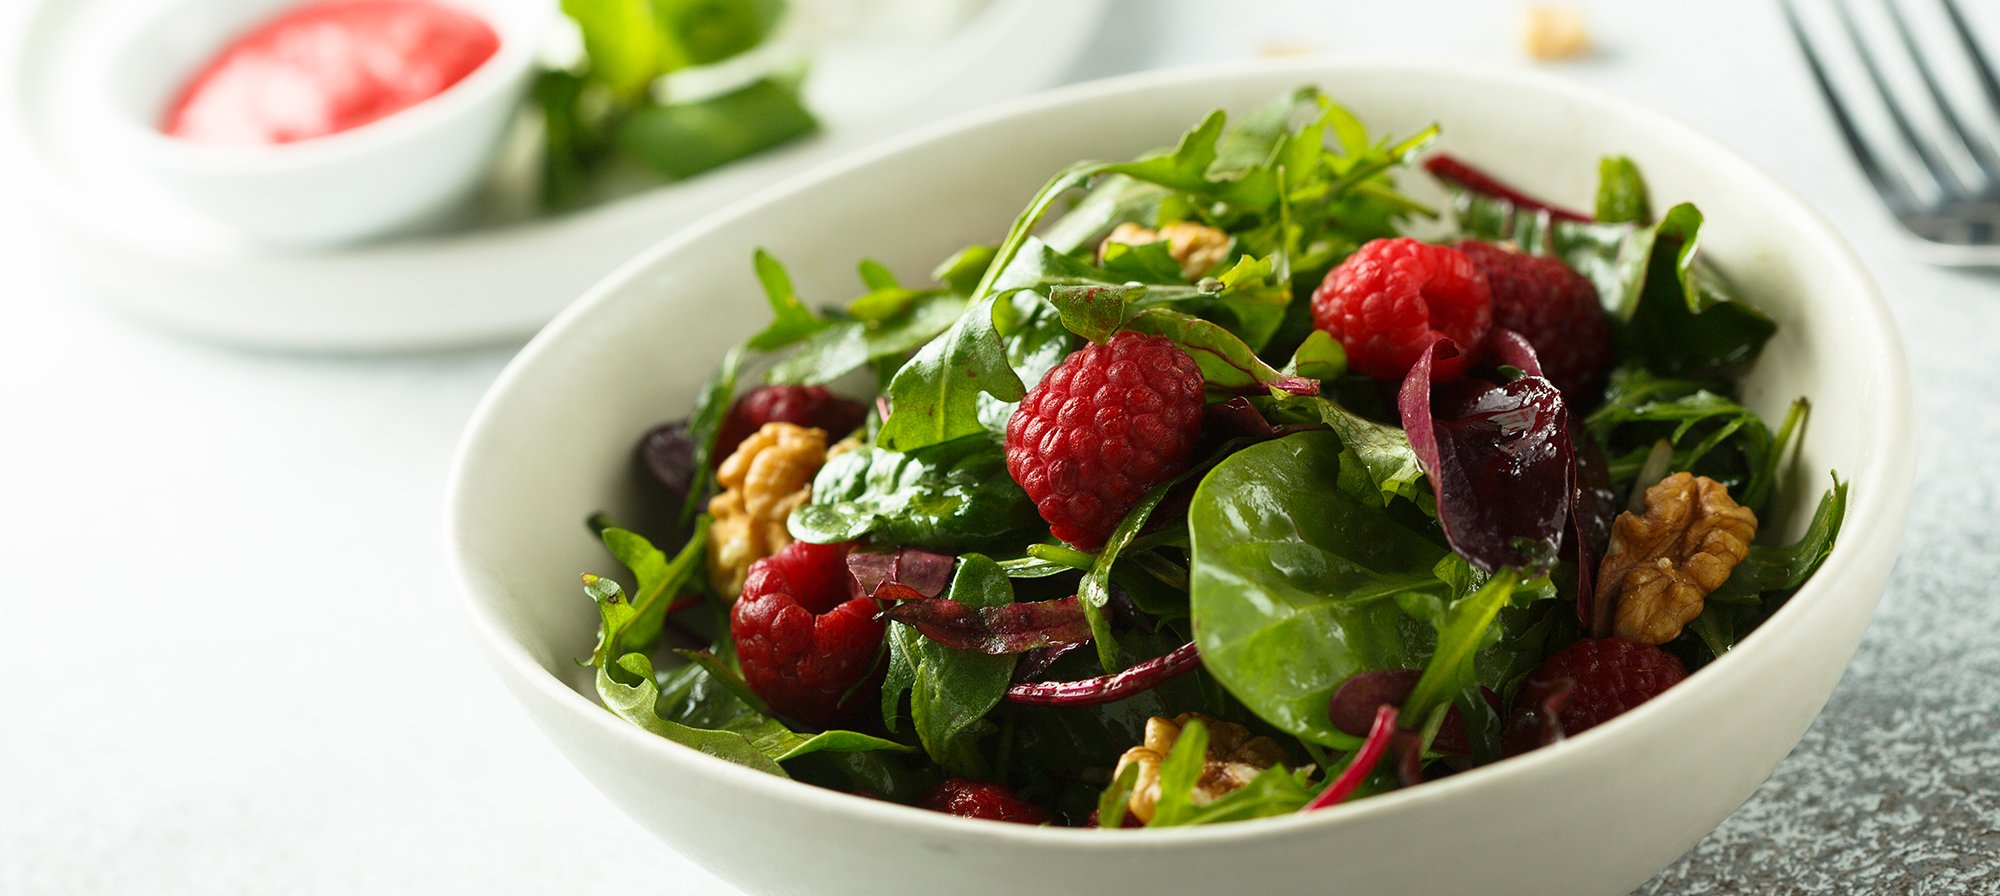 A Sweet, Crunchy, and Savory Spinach Salad With Raspberry Dressing